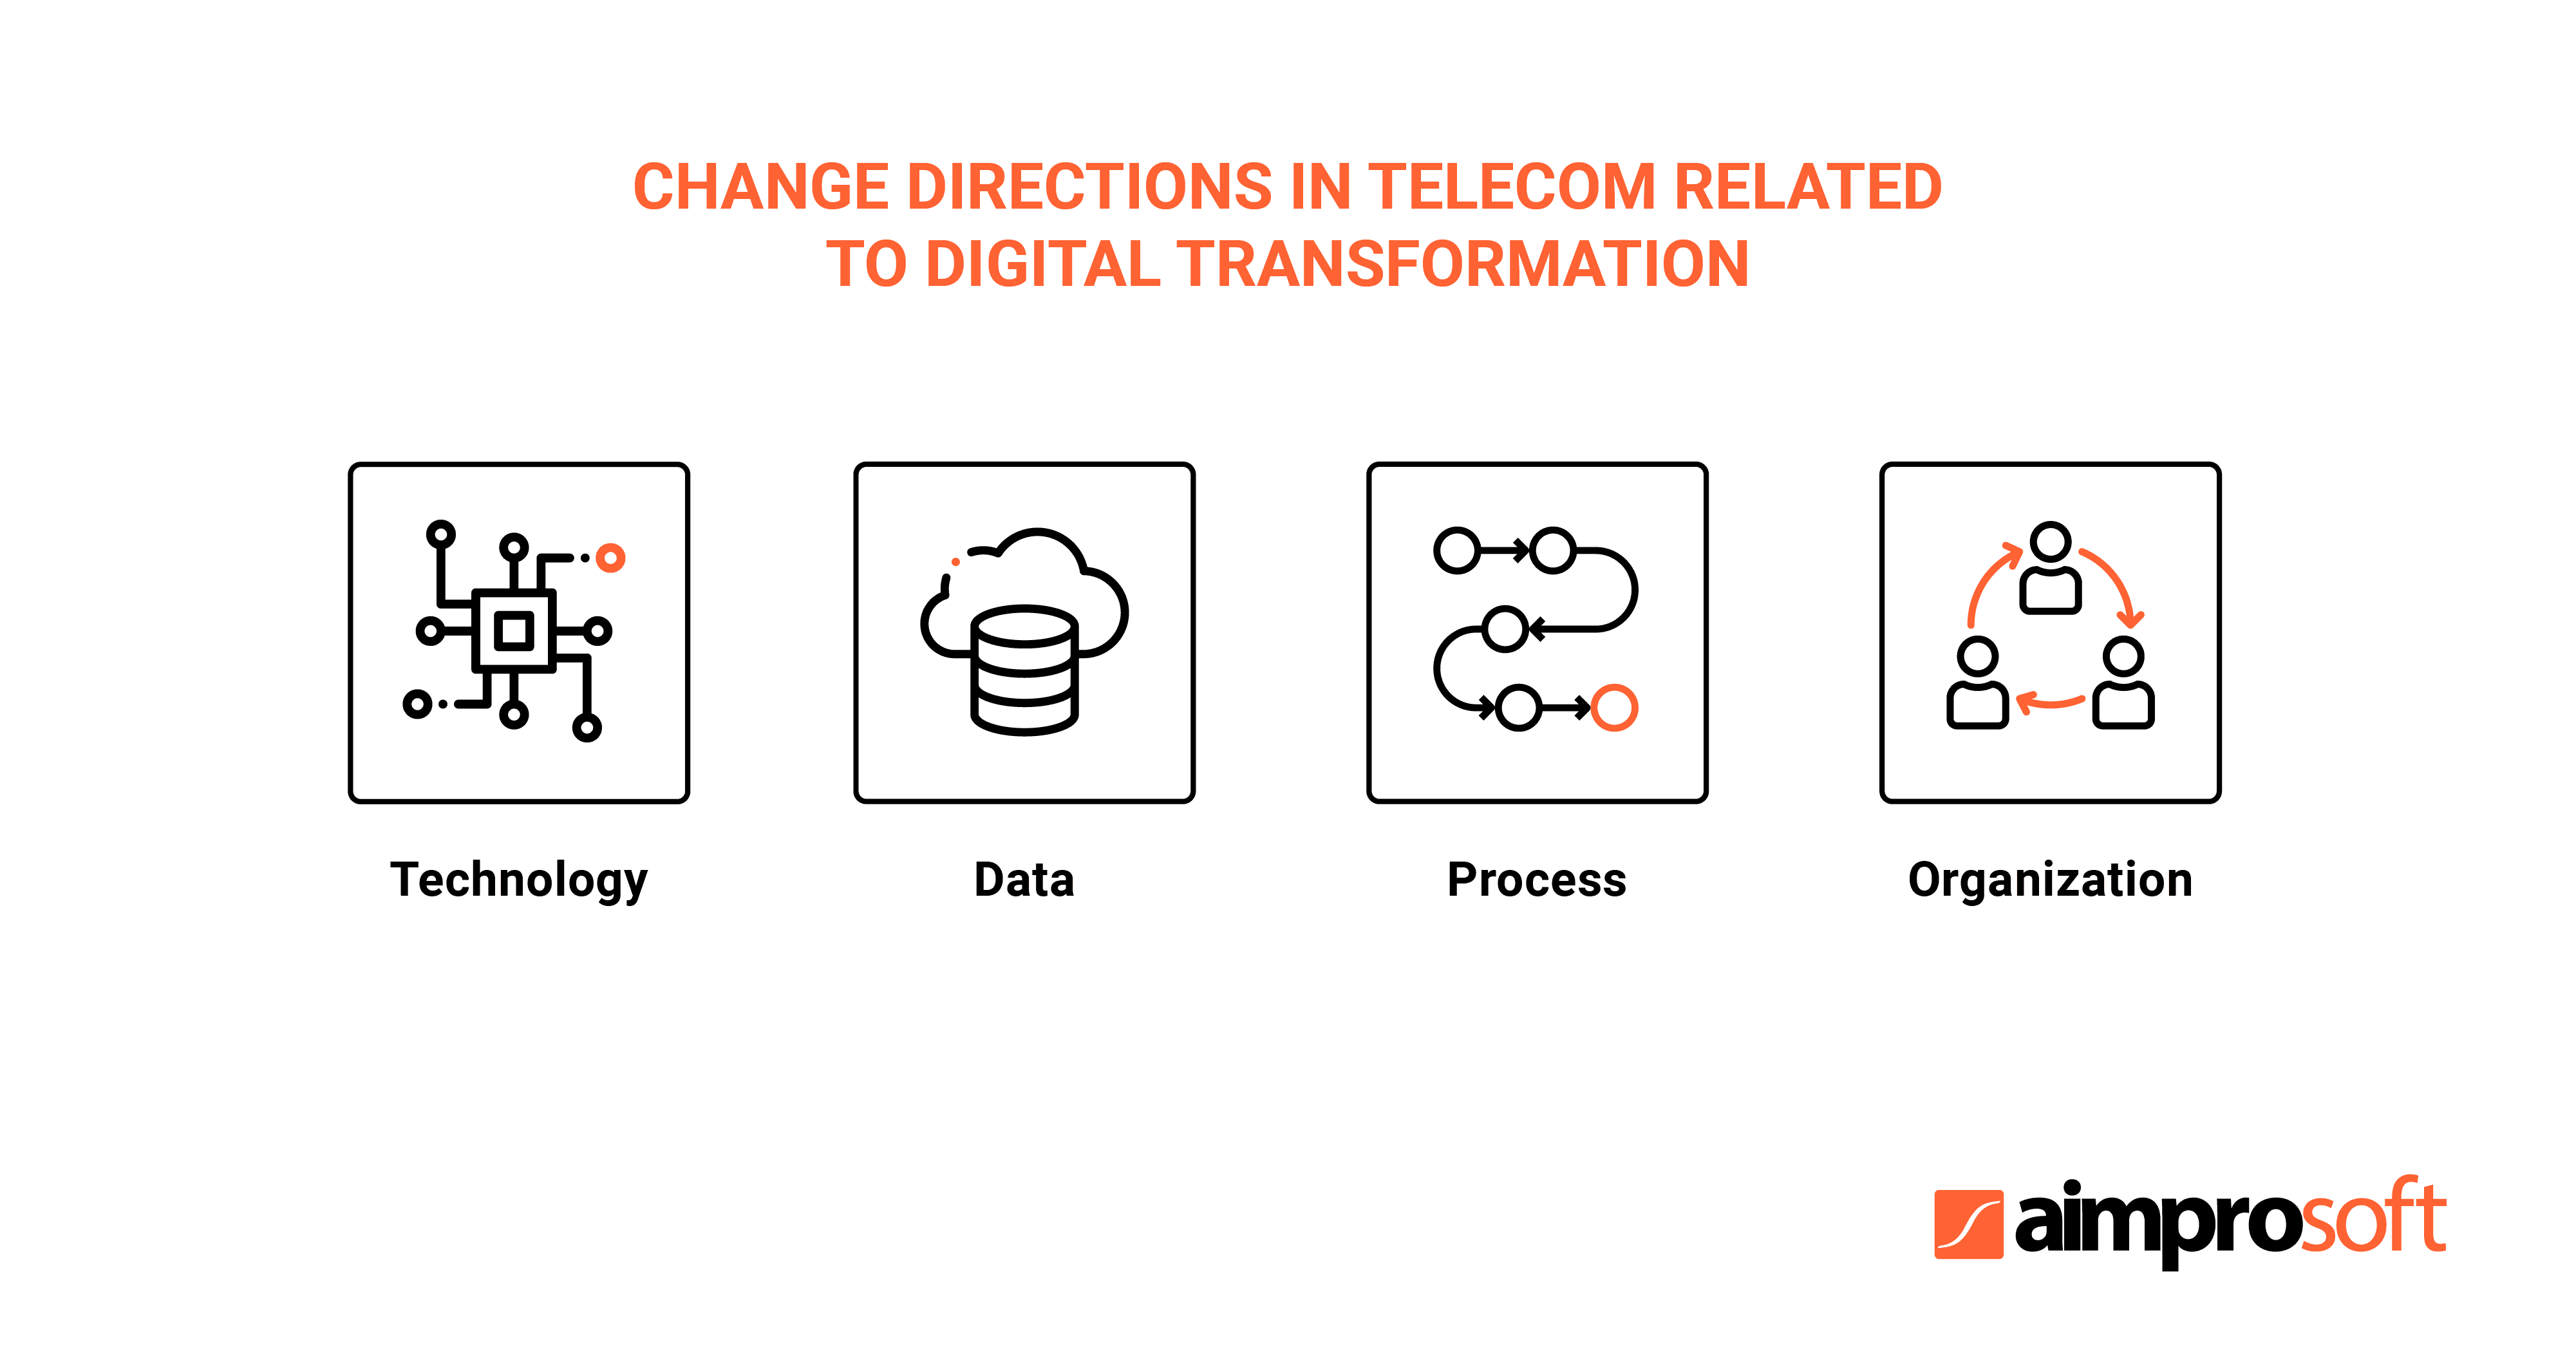 Digitalization usually happens in four main directions in telecom.